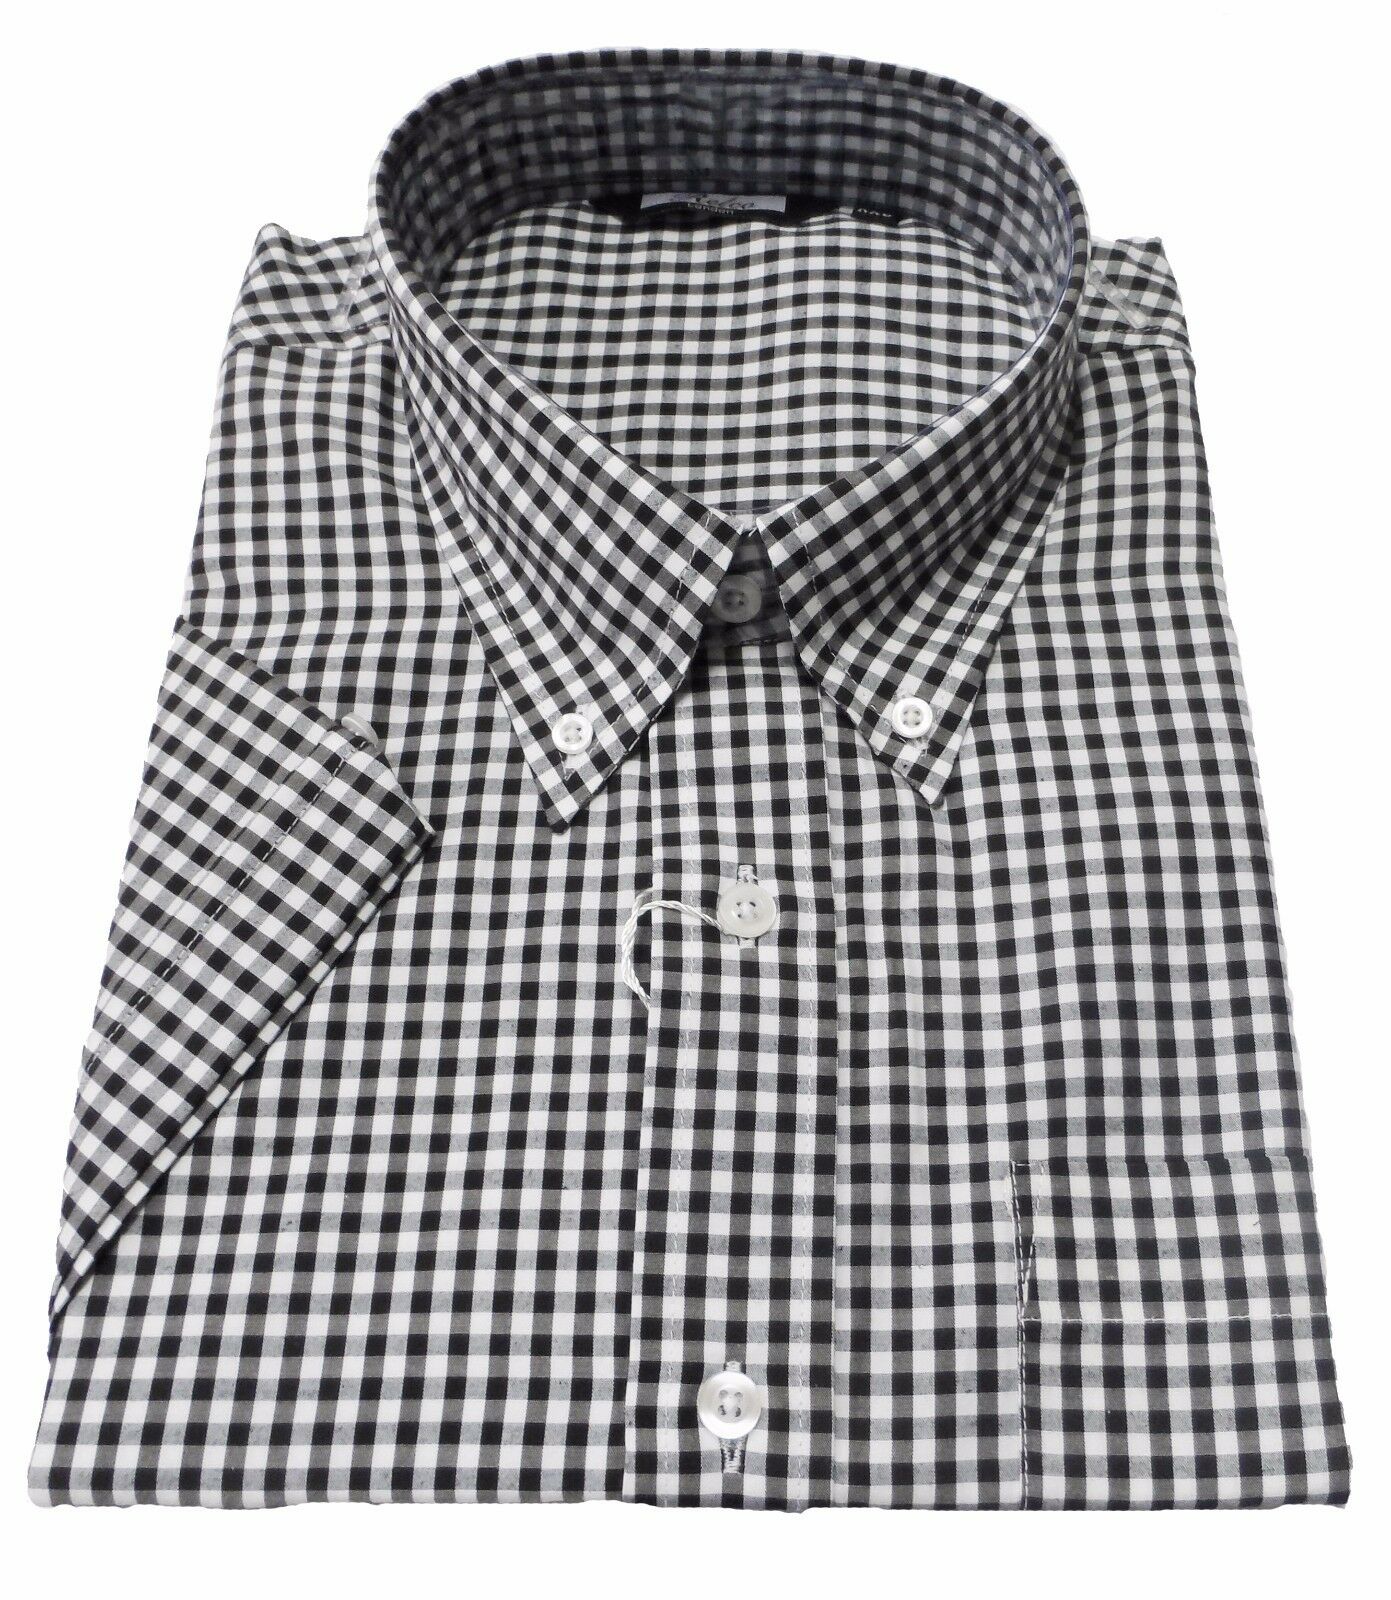 Relco Short Sleeved Black Gingham Check Button Down Shirts